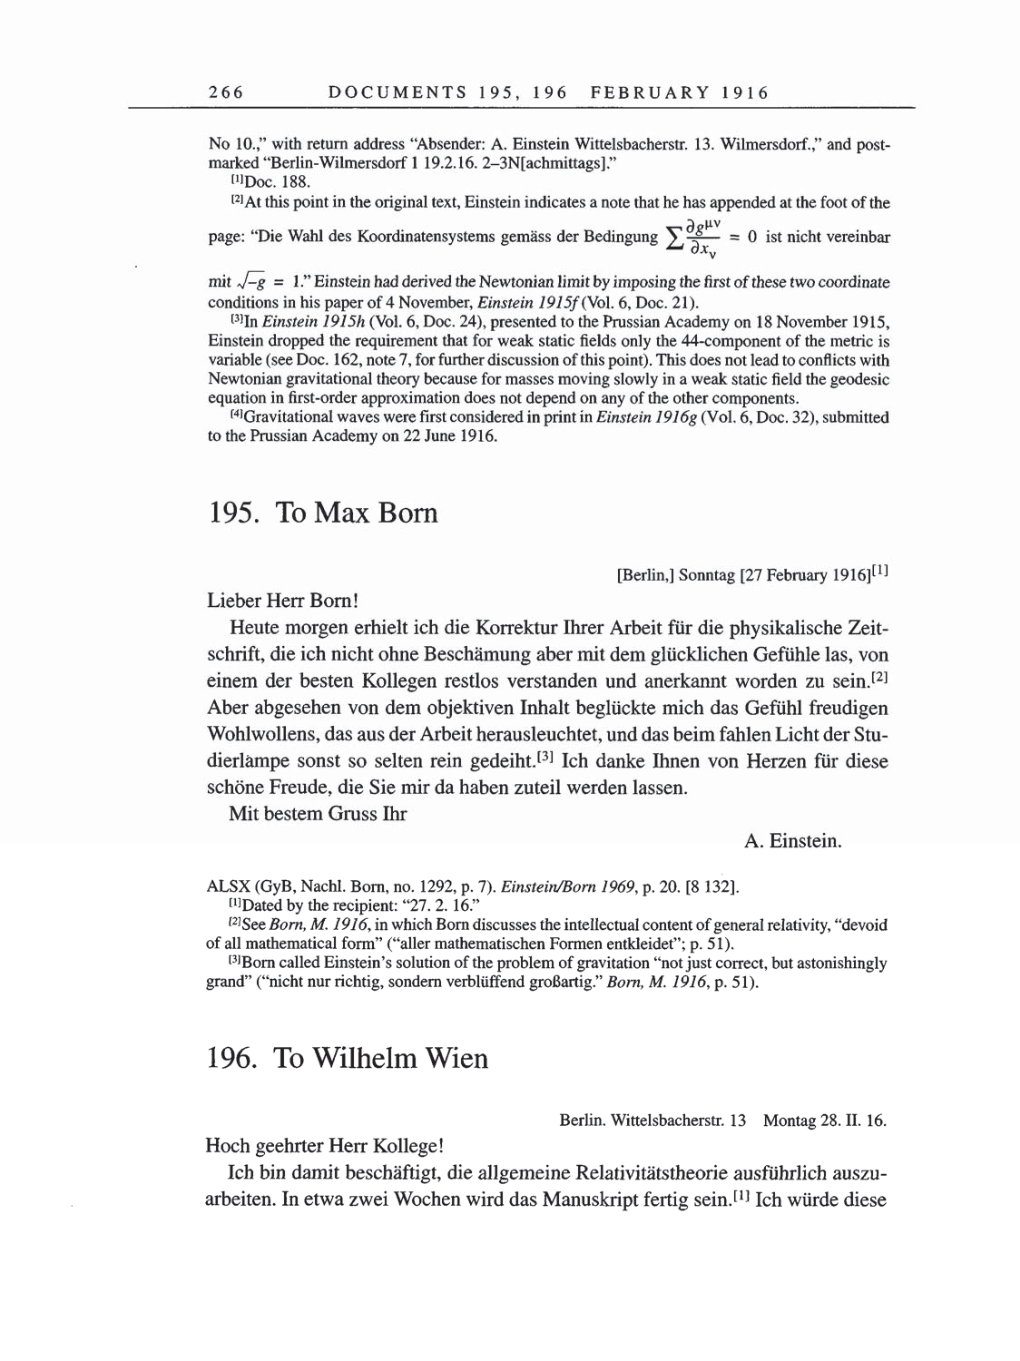 Volume 8, Part A: The Berlin Years: Correspondence 1914-1917 page 266